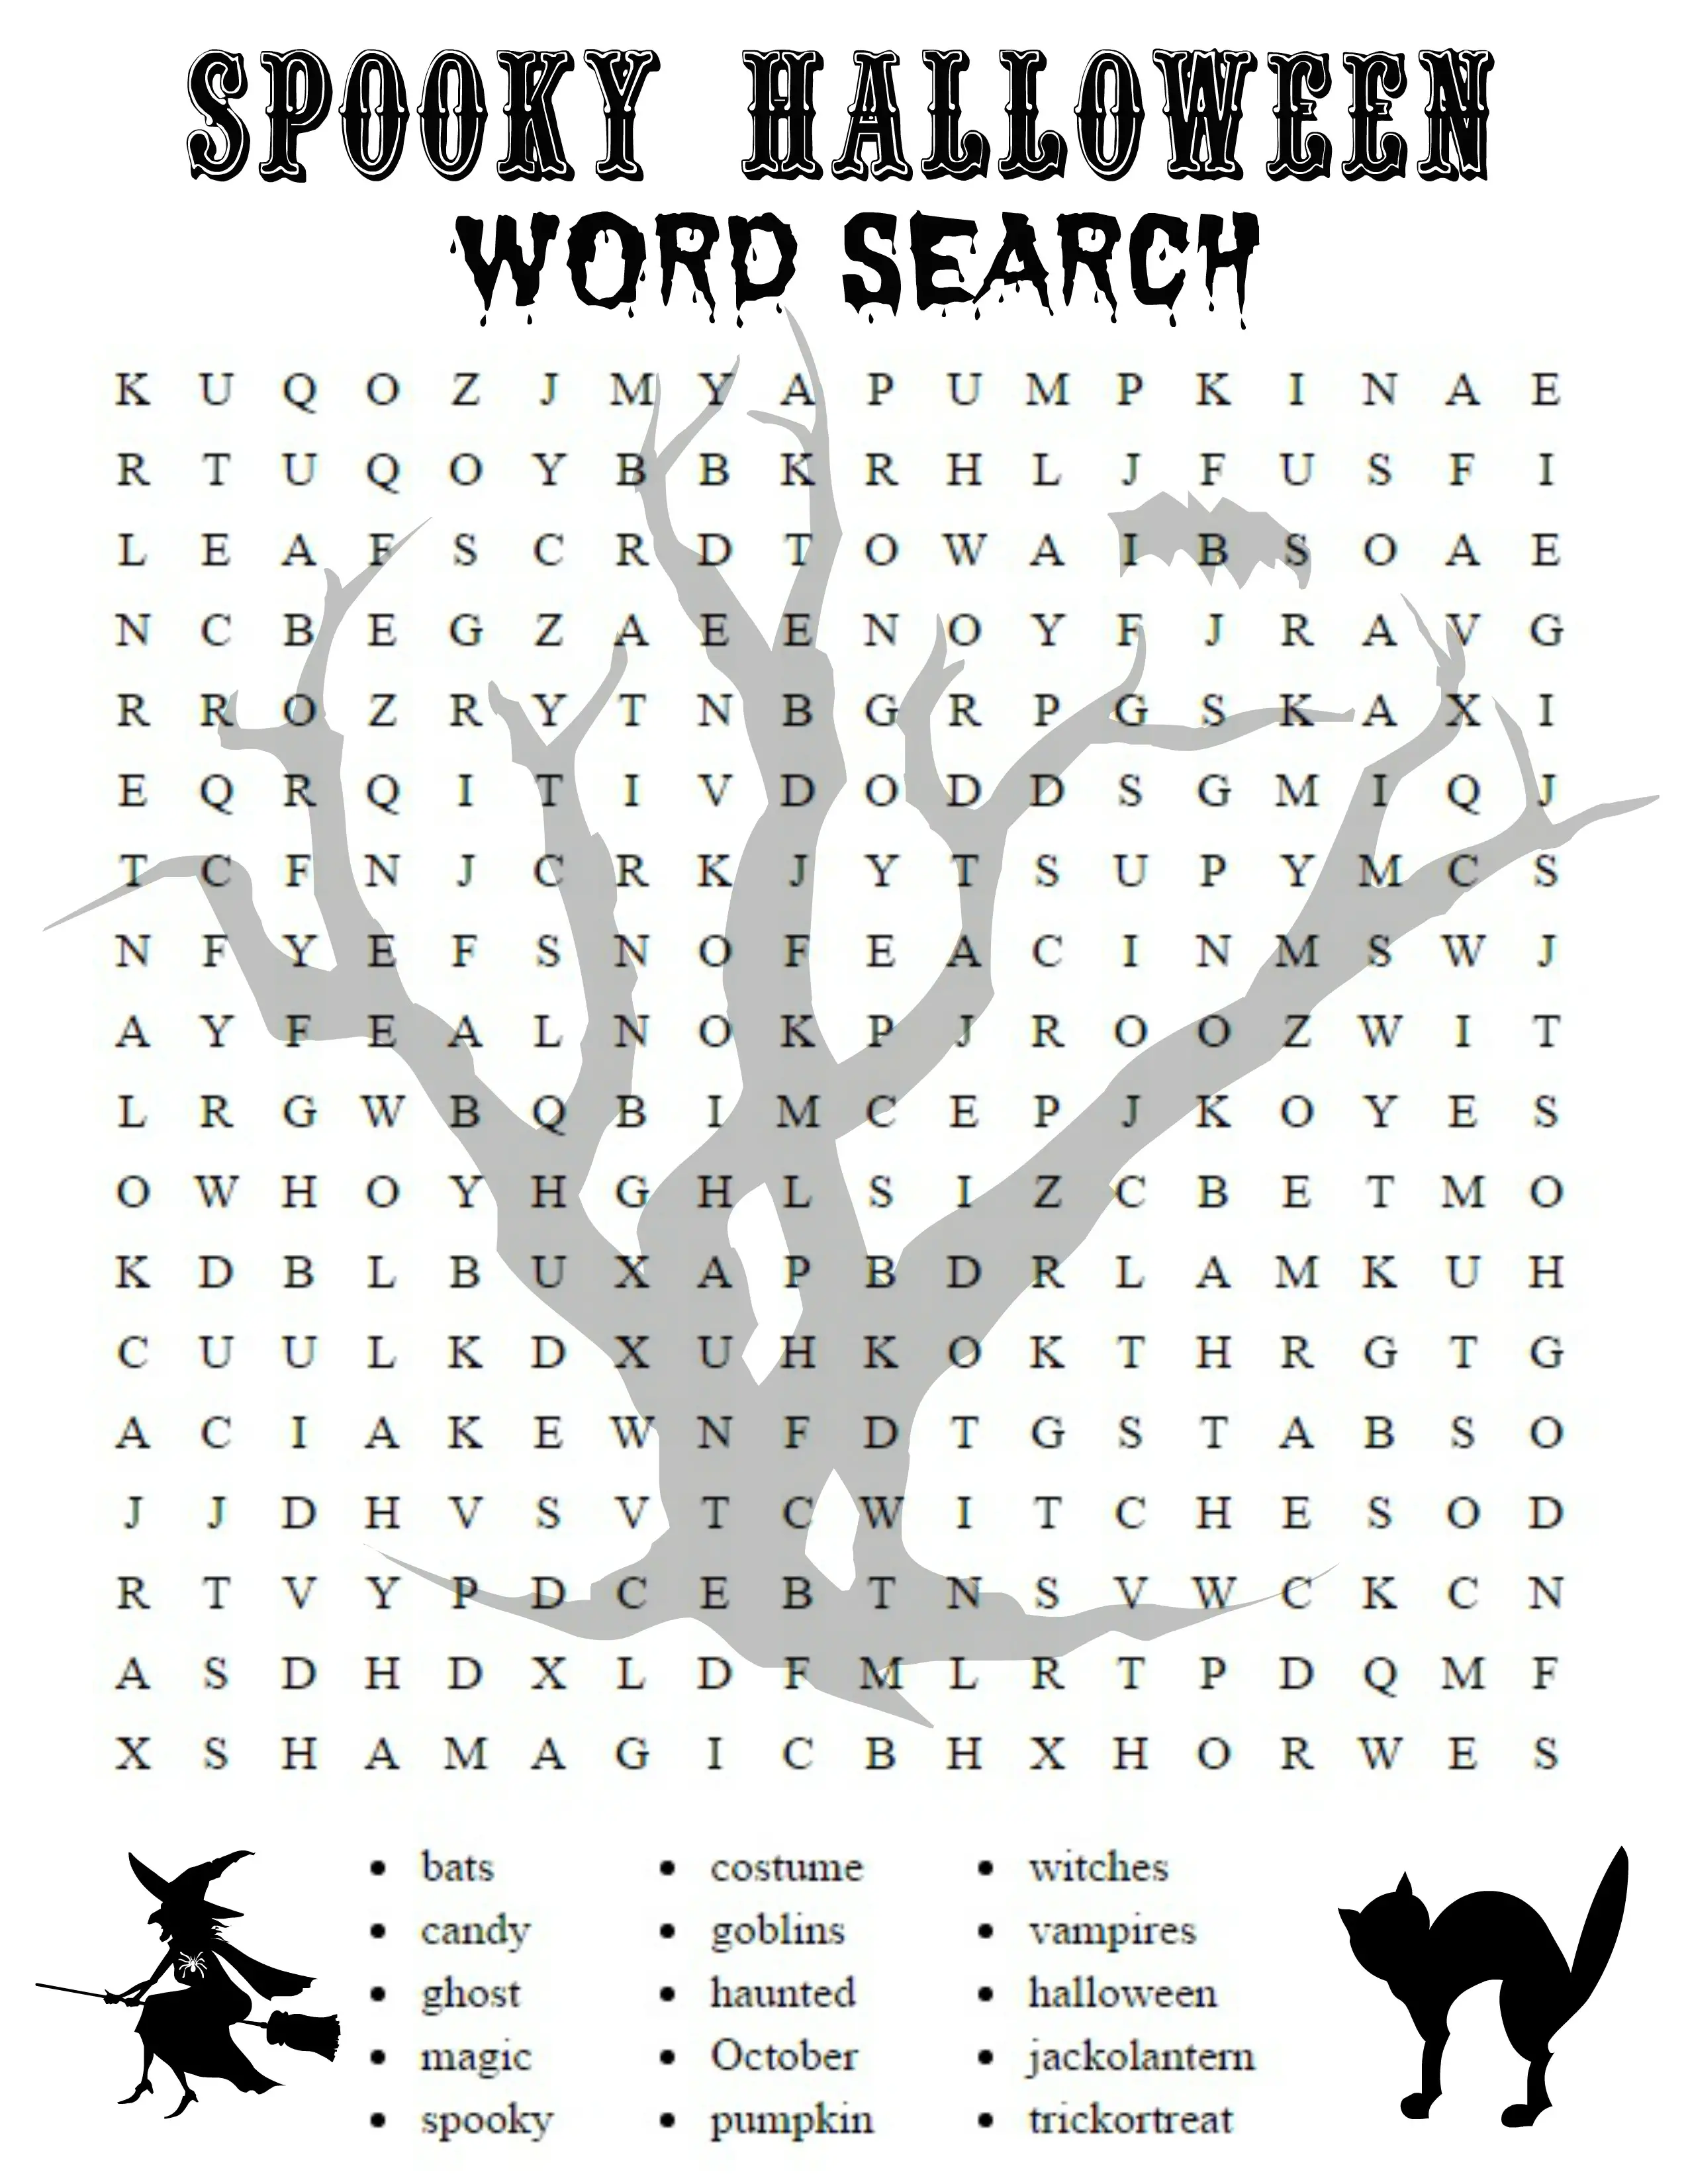 26 spooky halloween word searches kittybabylovecom